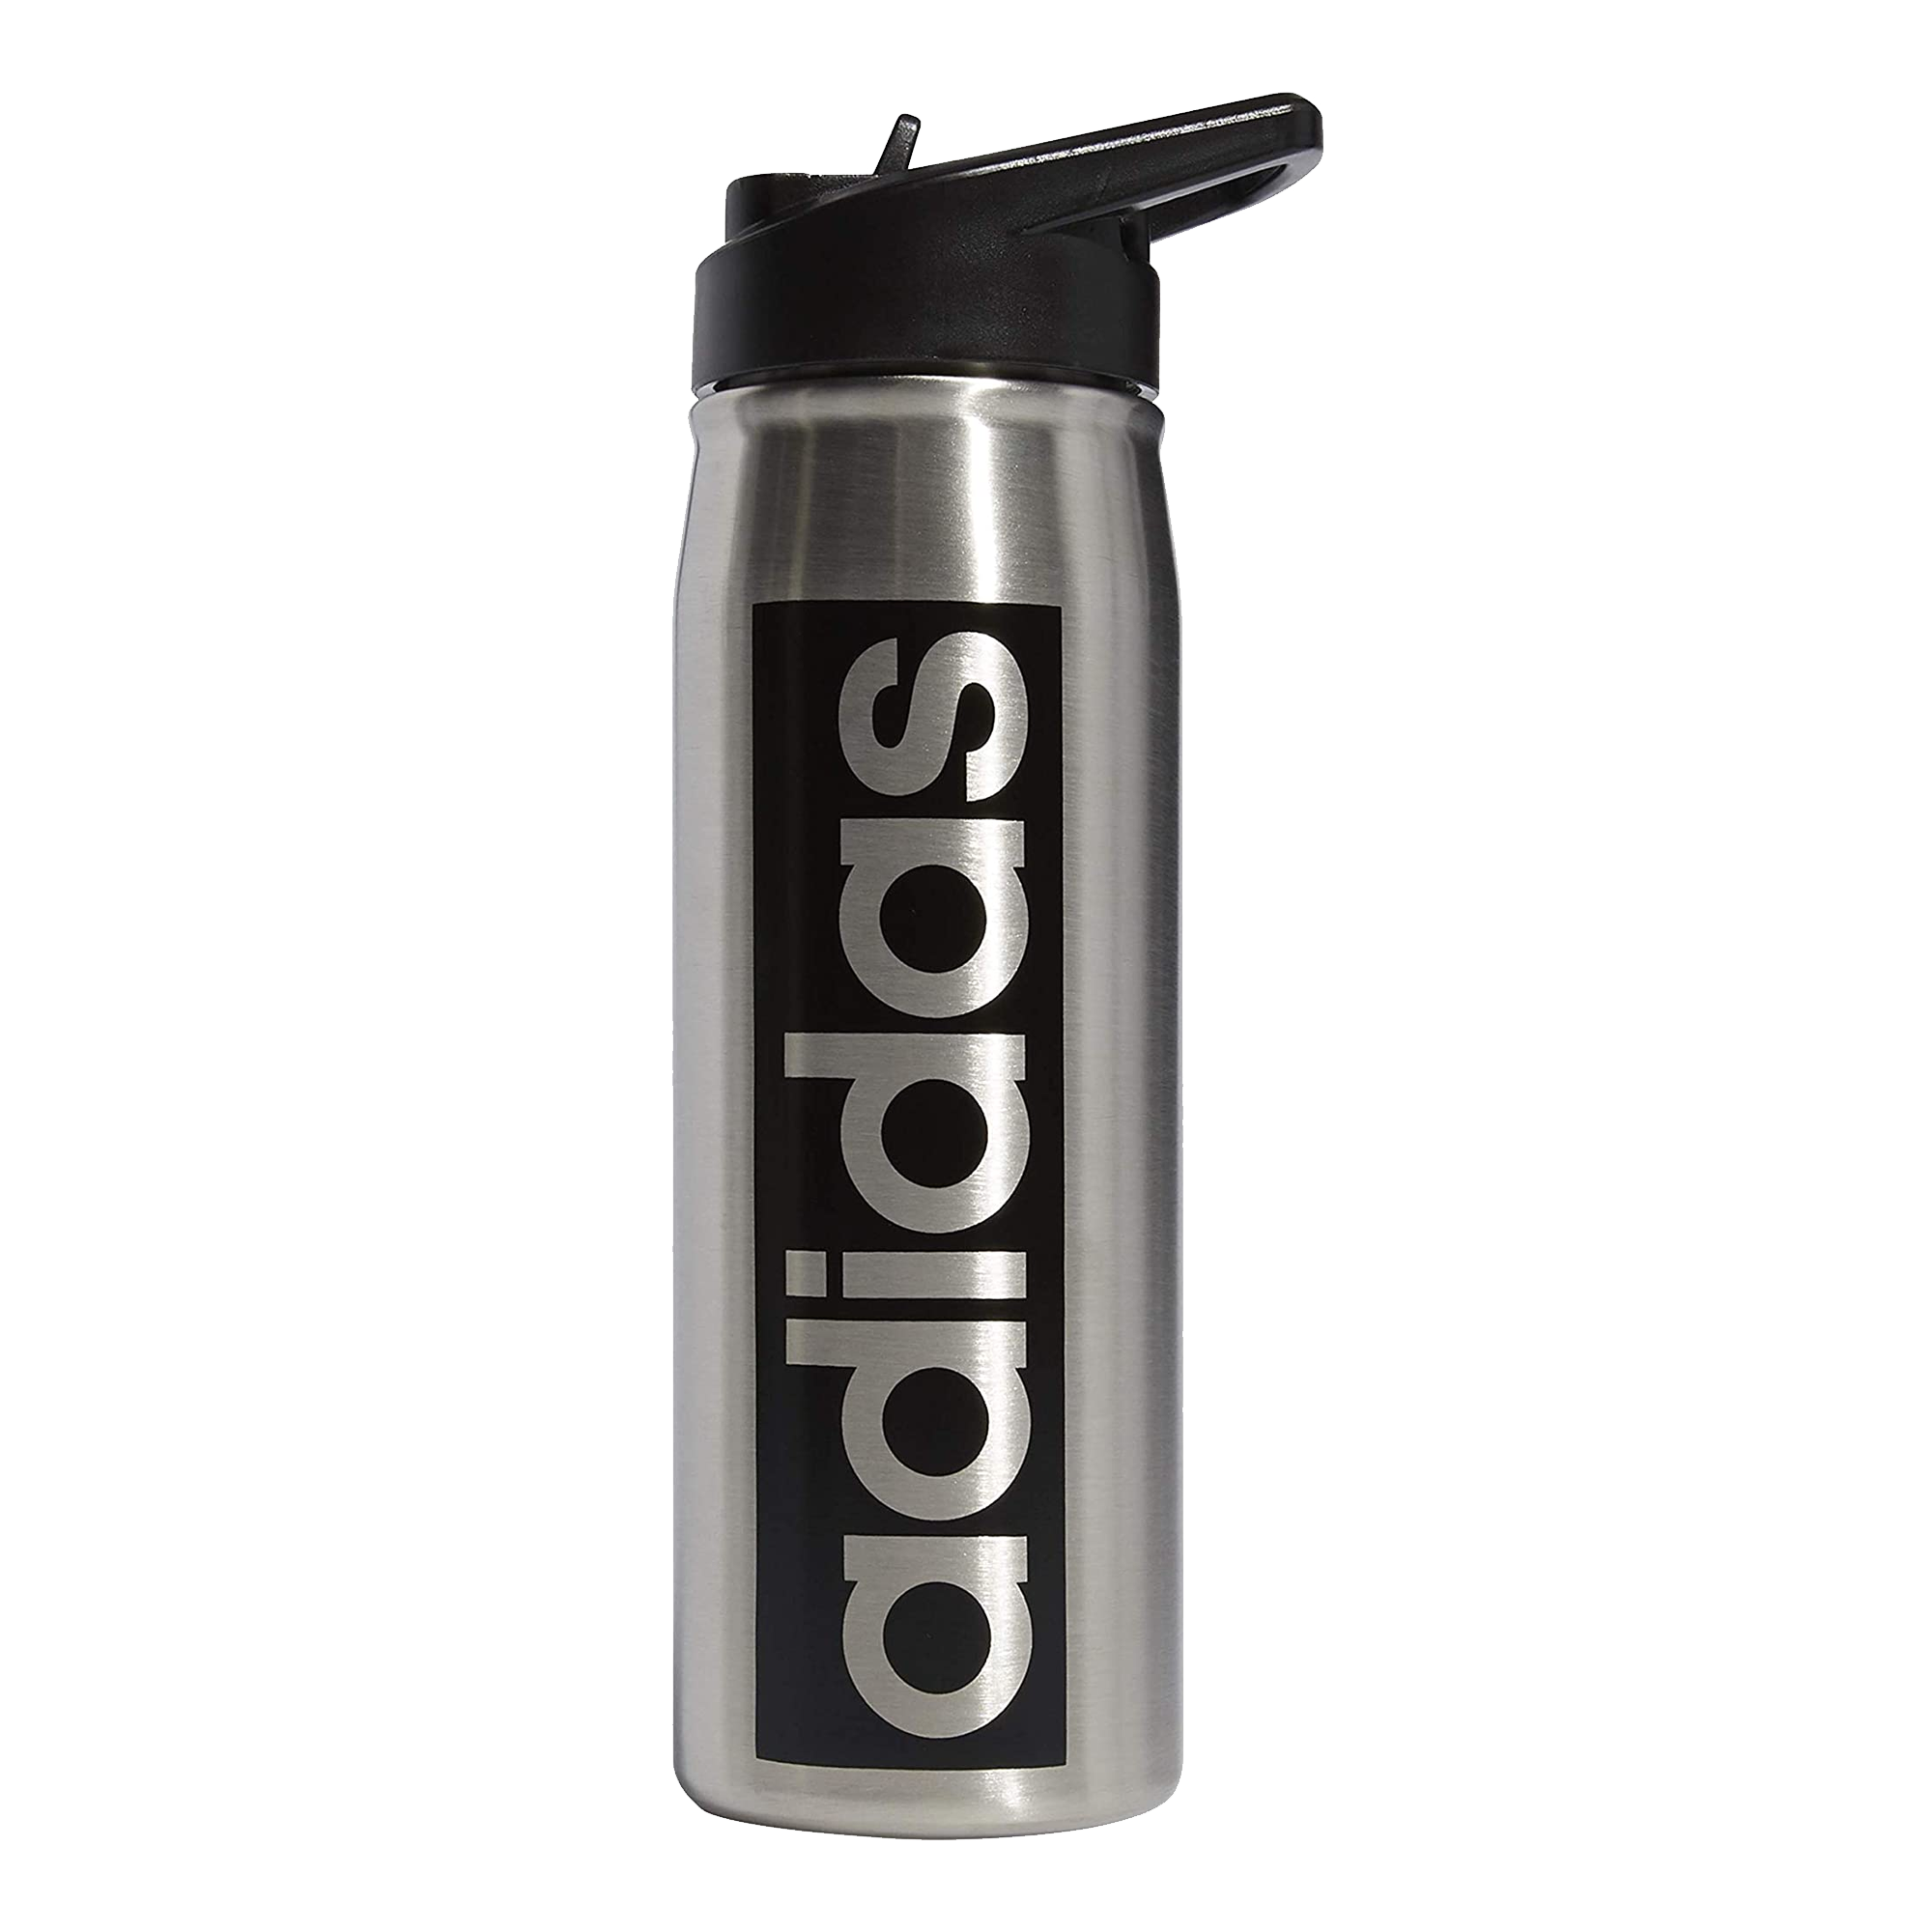 https://stefanssoccer.com/mm5/graphics/00000001/7/stainless-water-bottle.png